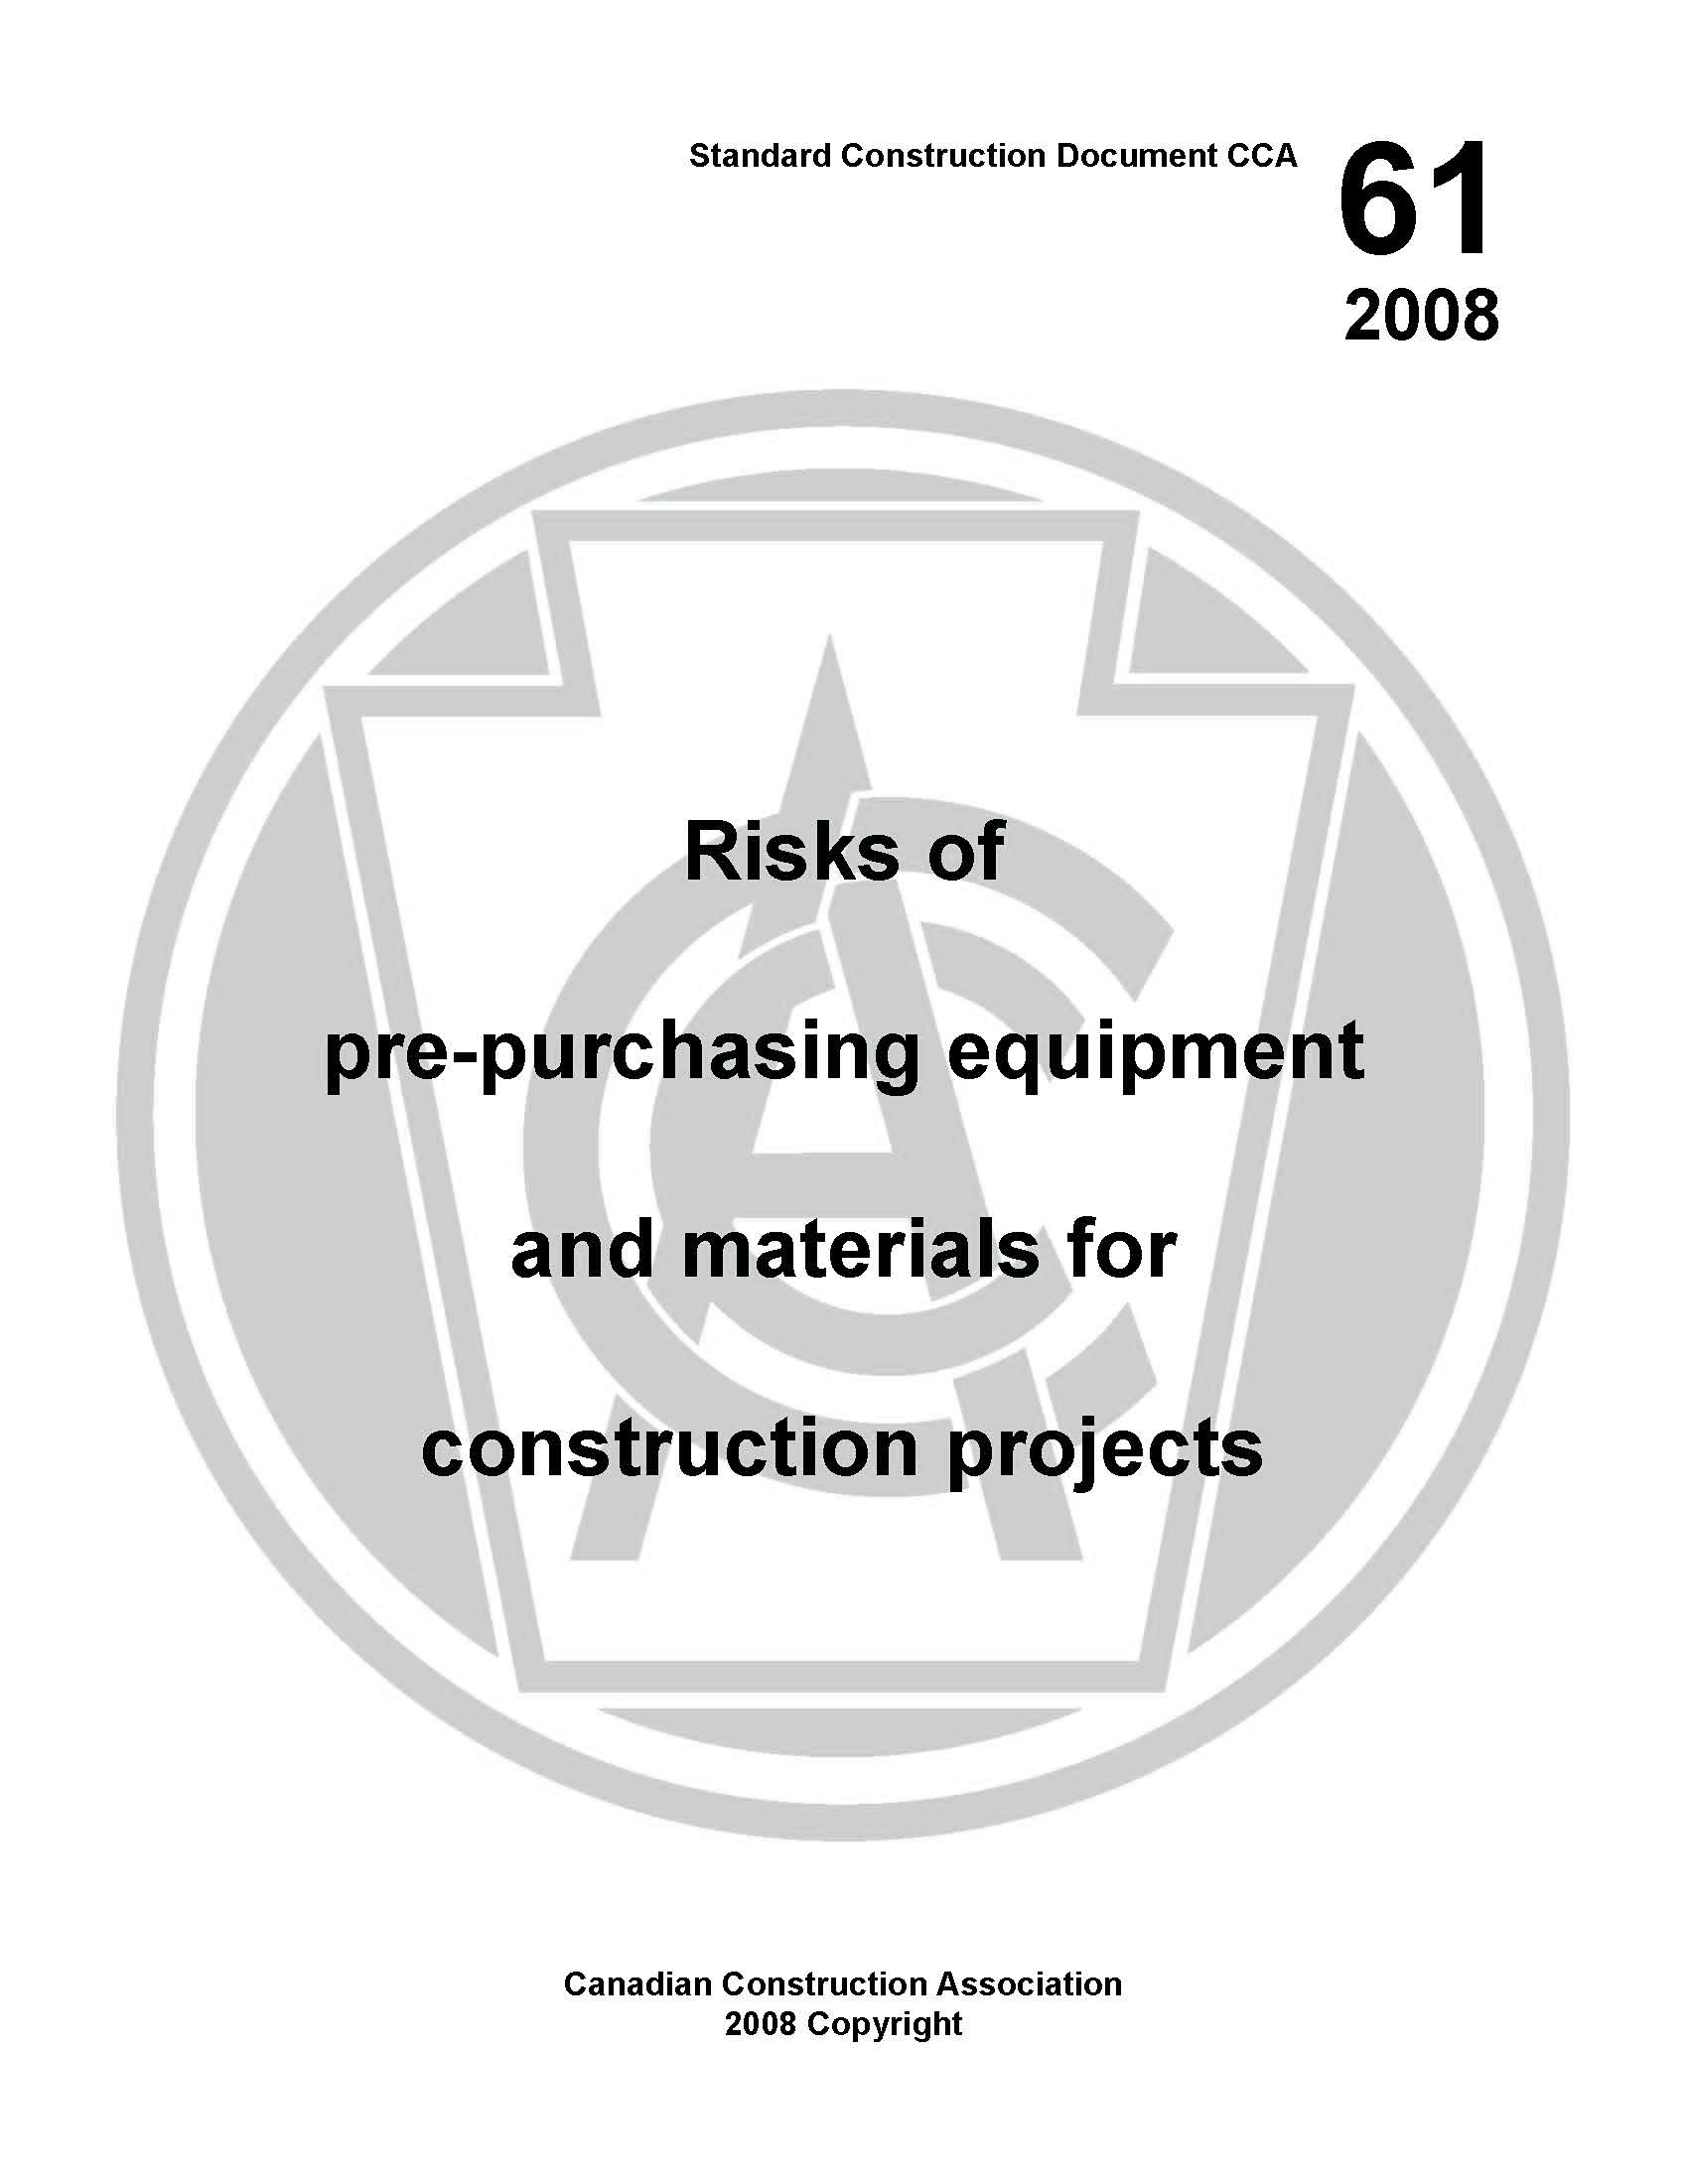 CCA 61 [Electronic Version] Risks of pre-purchasing equip. & materials for projects